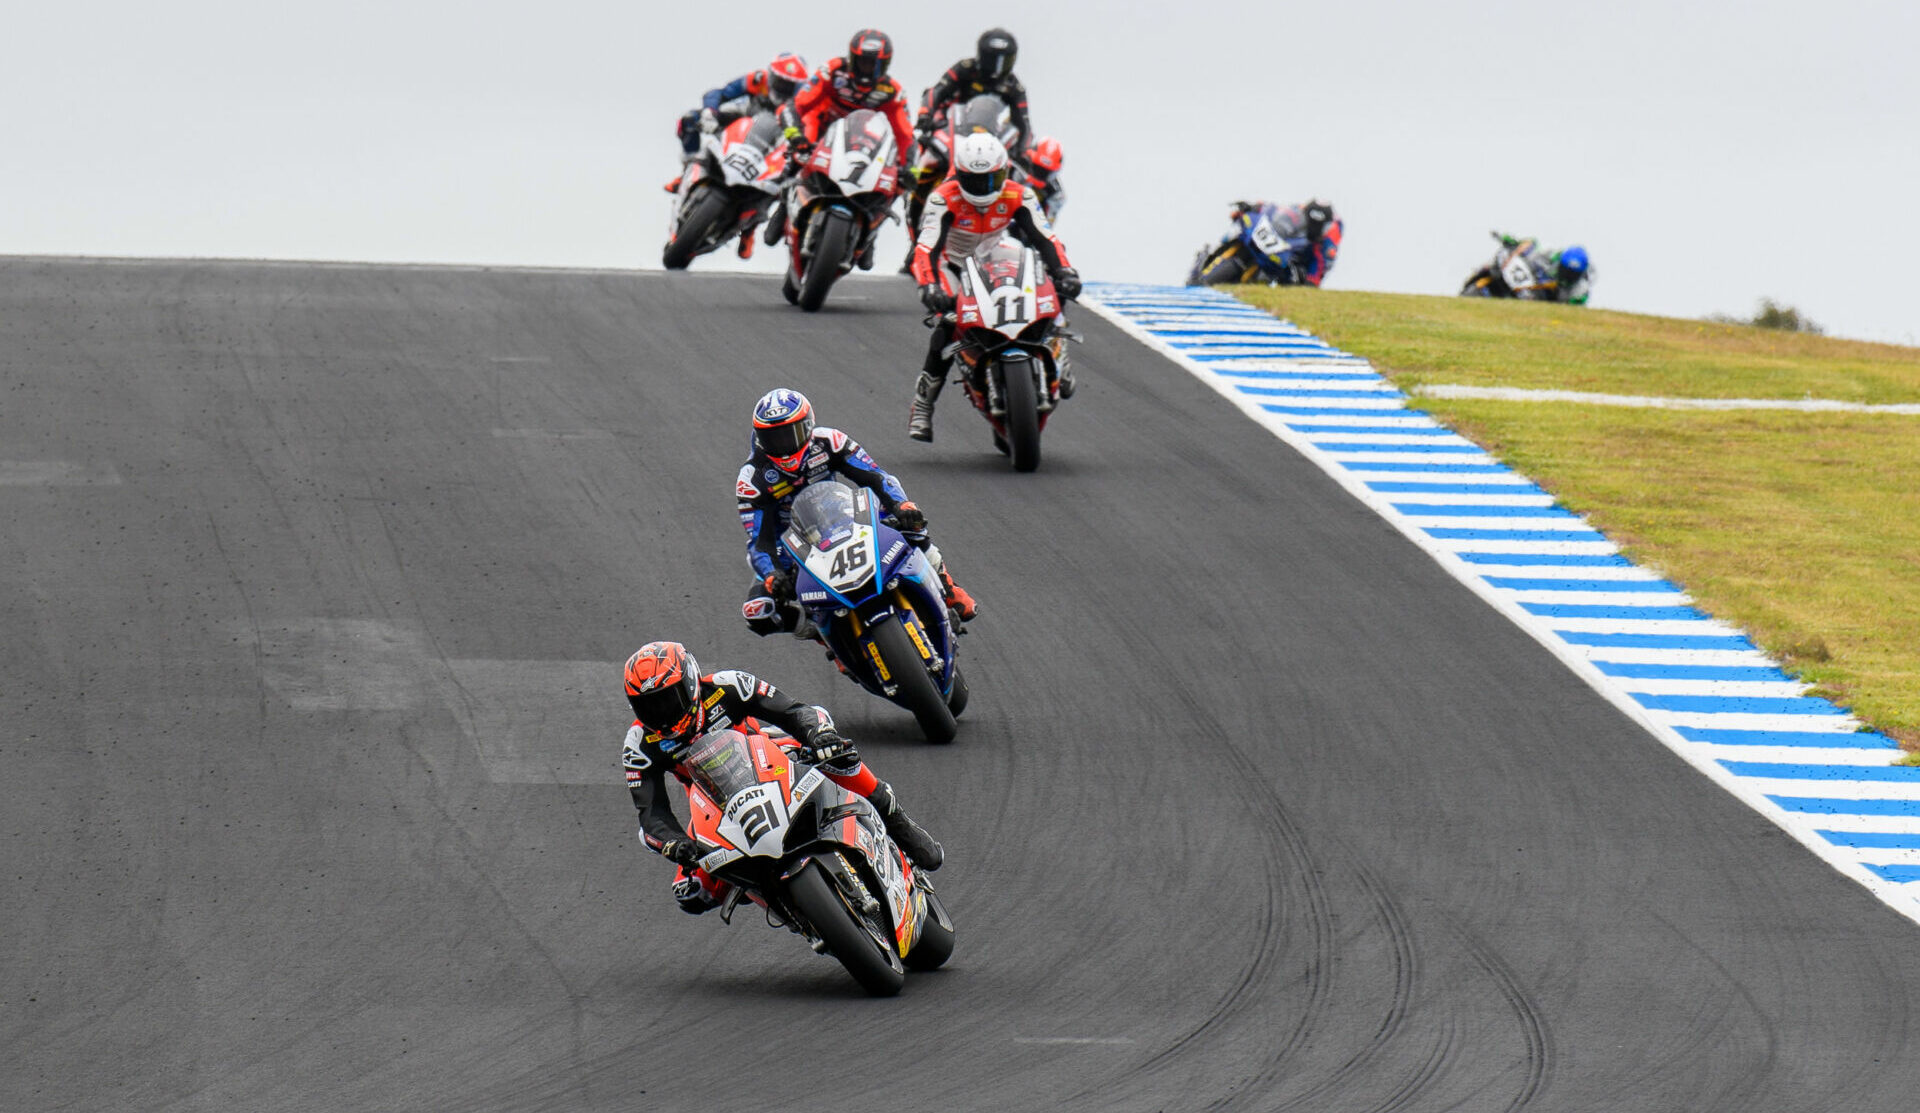 Josh Waters (21) leads Australian Superbike Race One ahead of Mike Jones (46), Broc Pearson (11), and Troy Herfoss (1). Photo by RbMotoLens, courtesy ASBK.